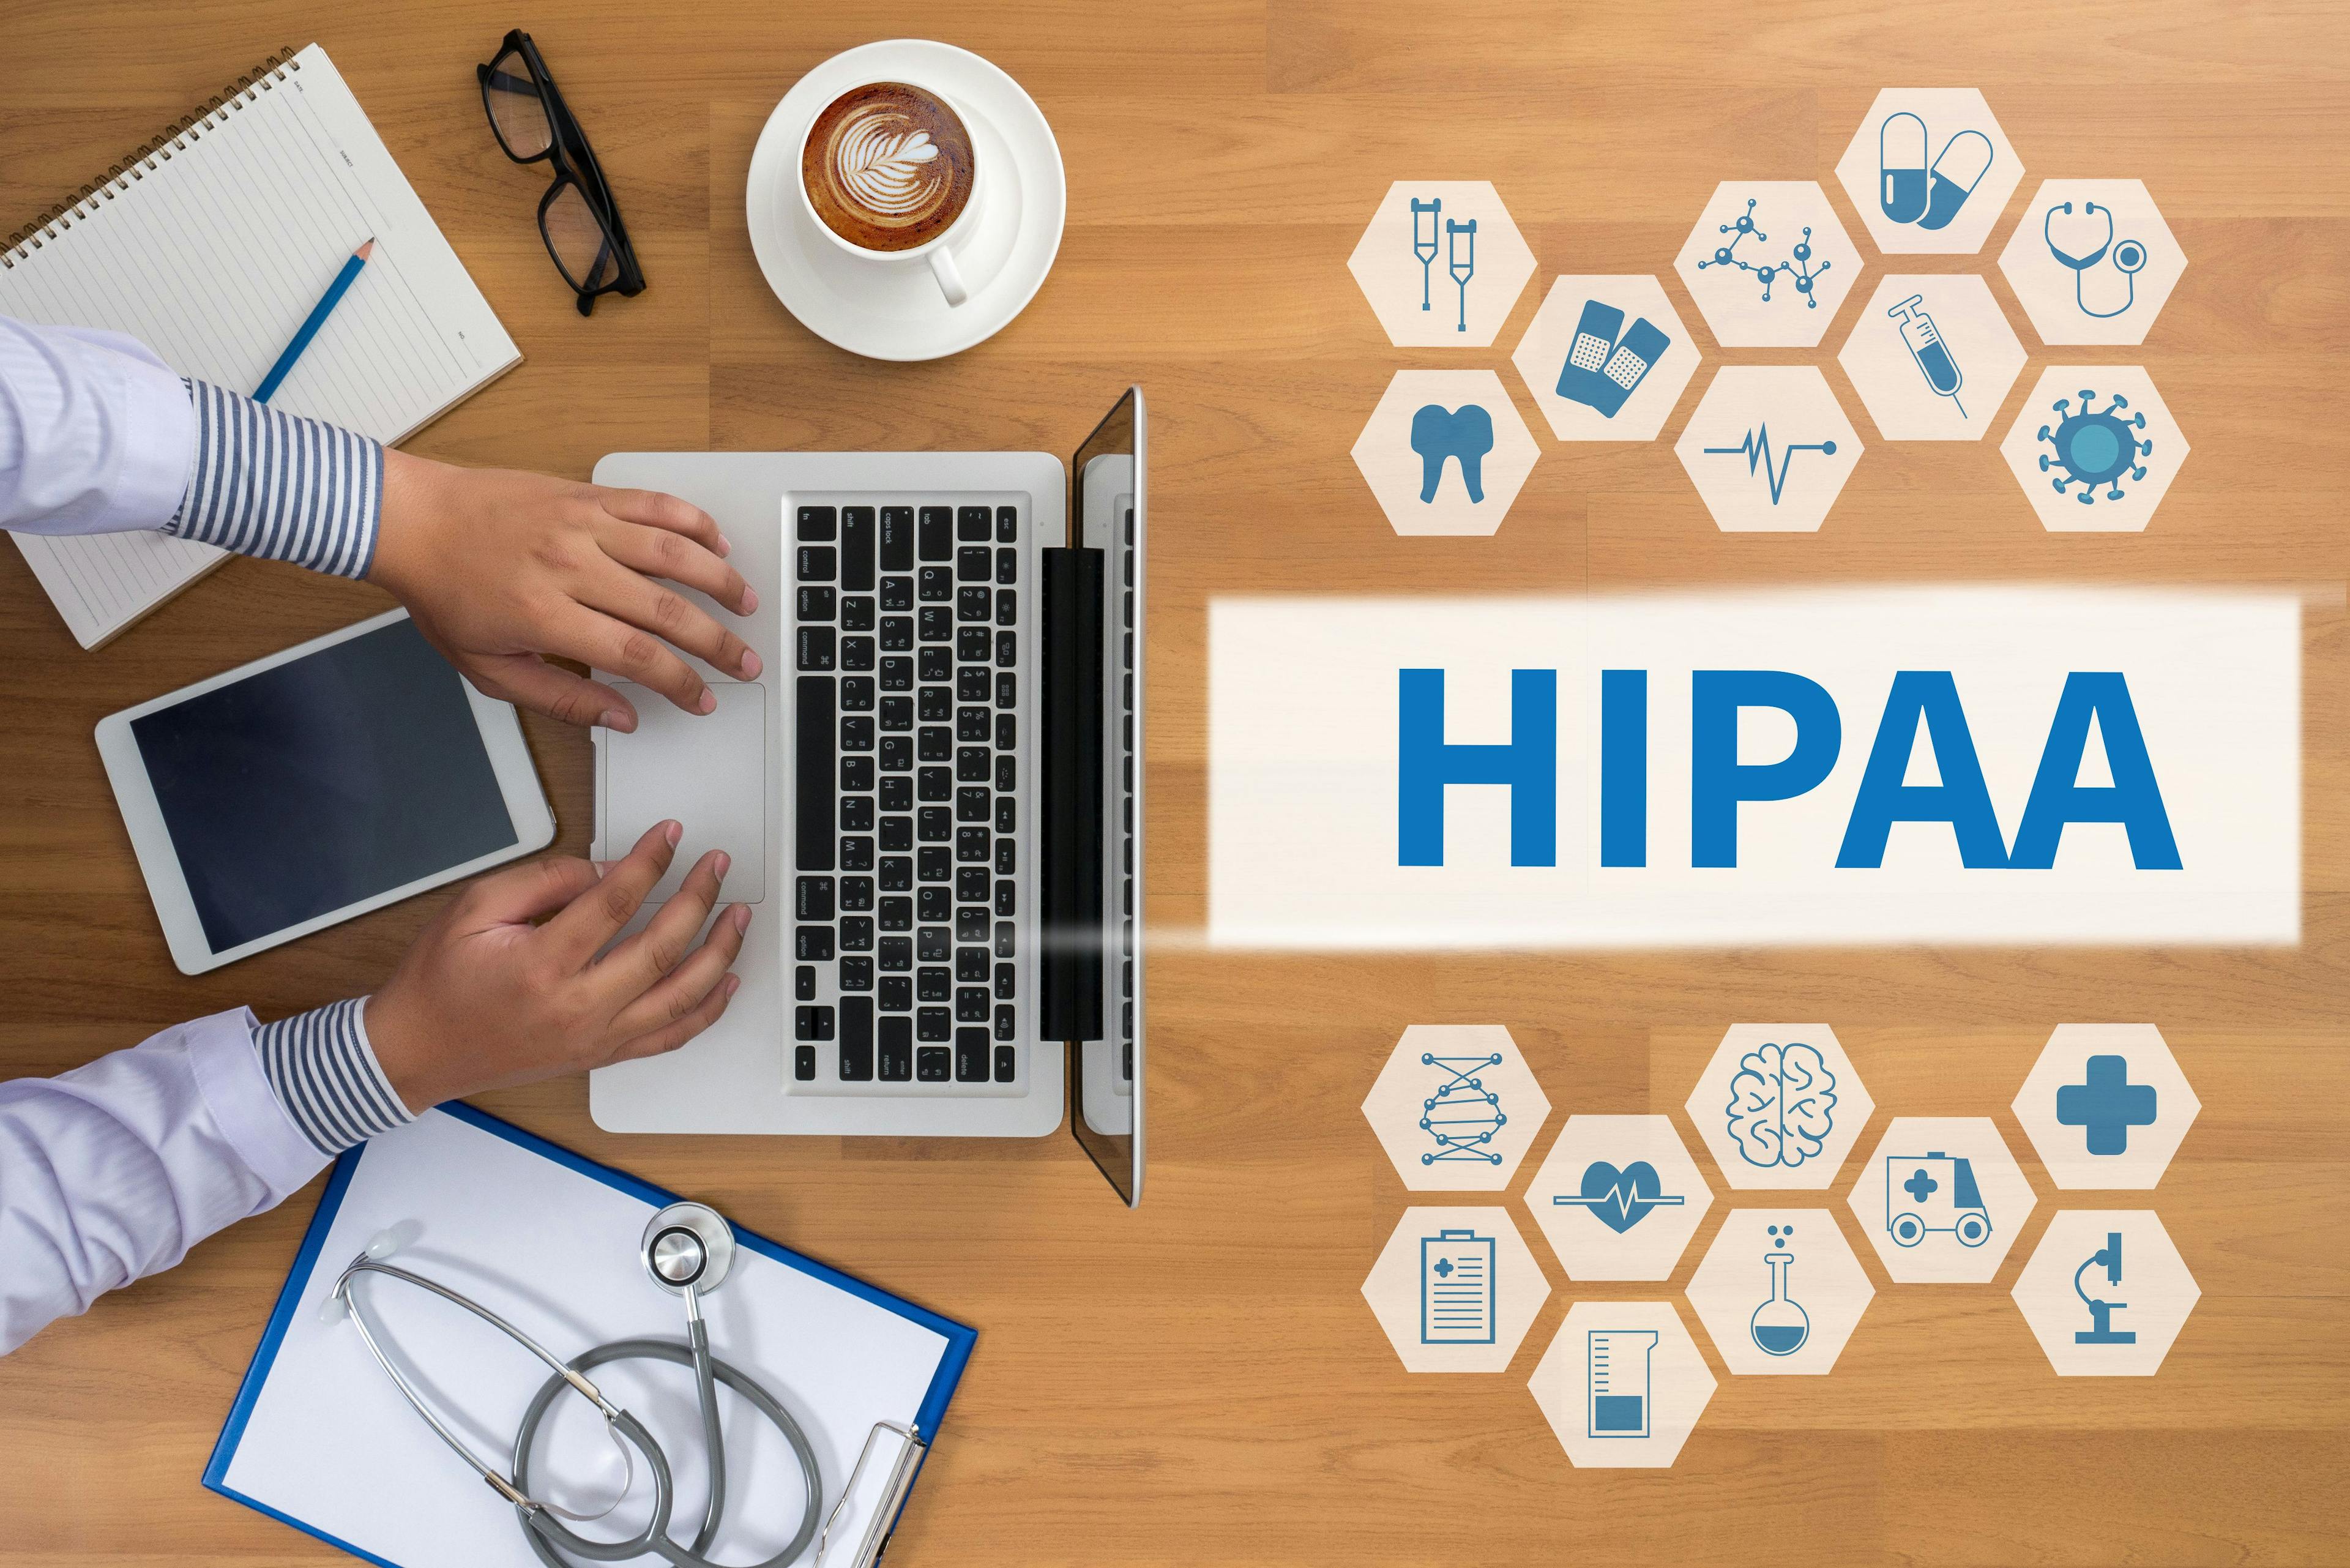 Most employees don't understand HIPAA rules: ©Onephoto - stock.adobe.com